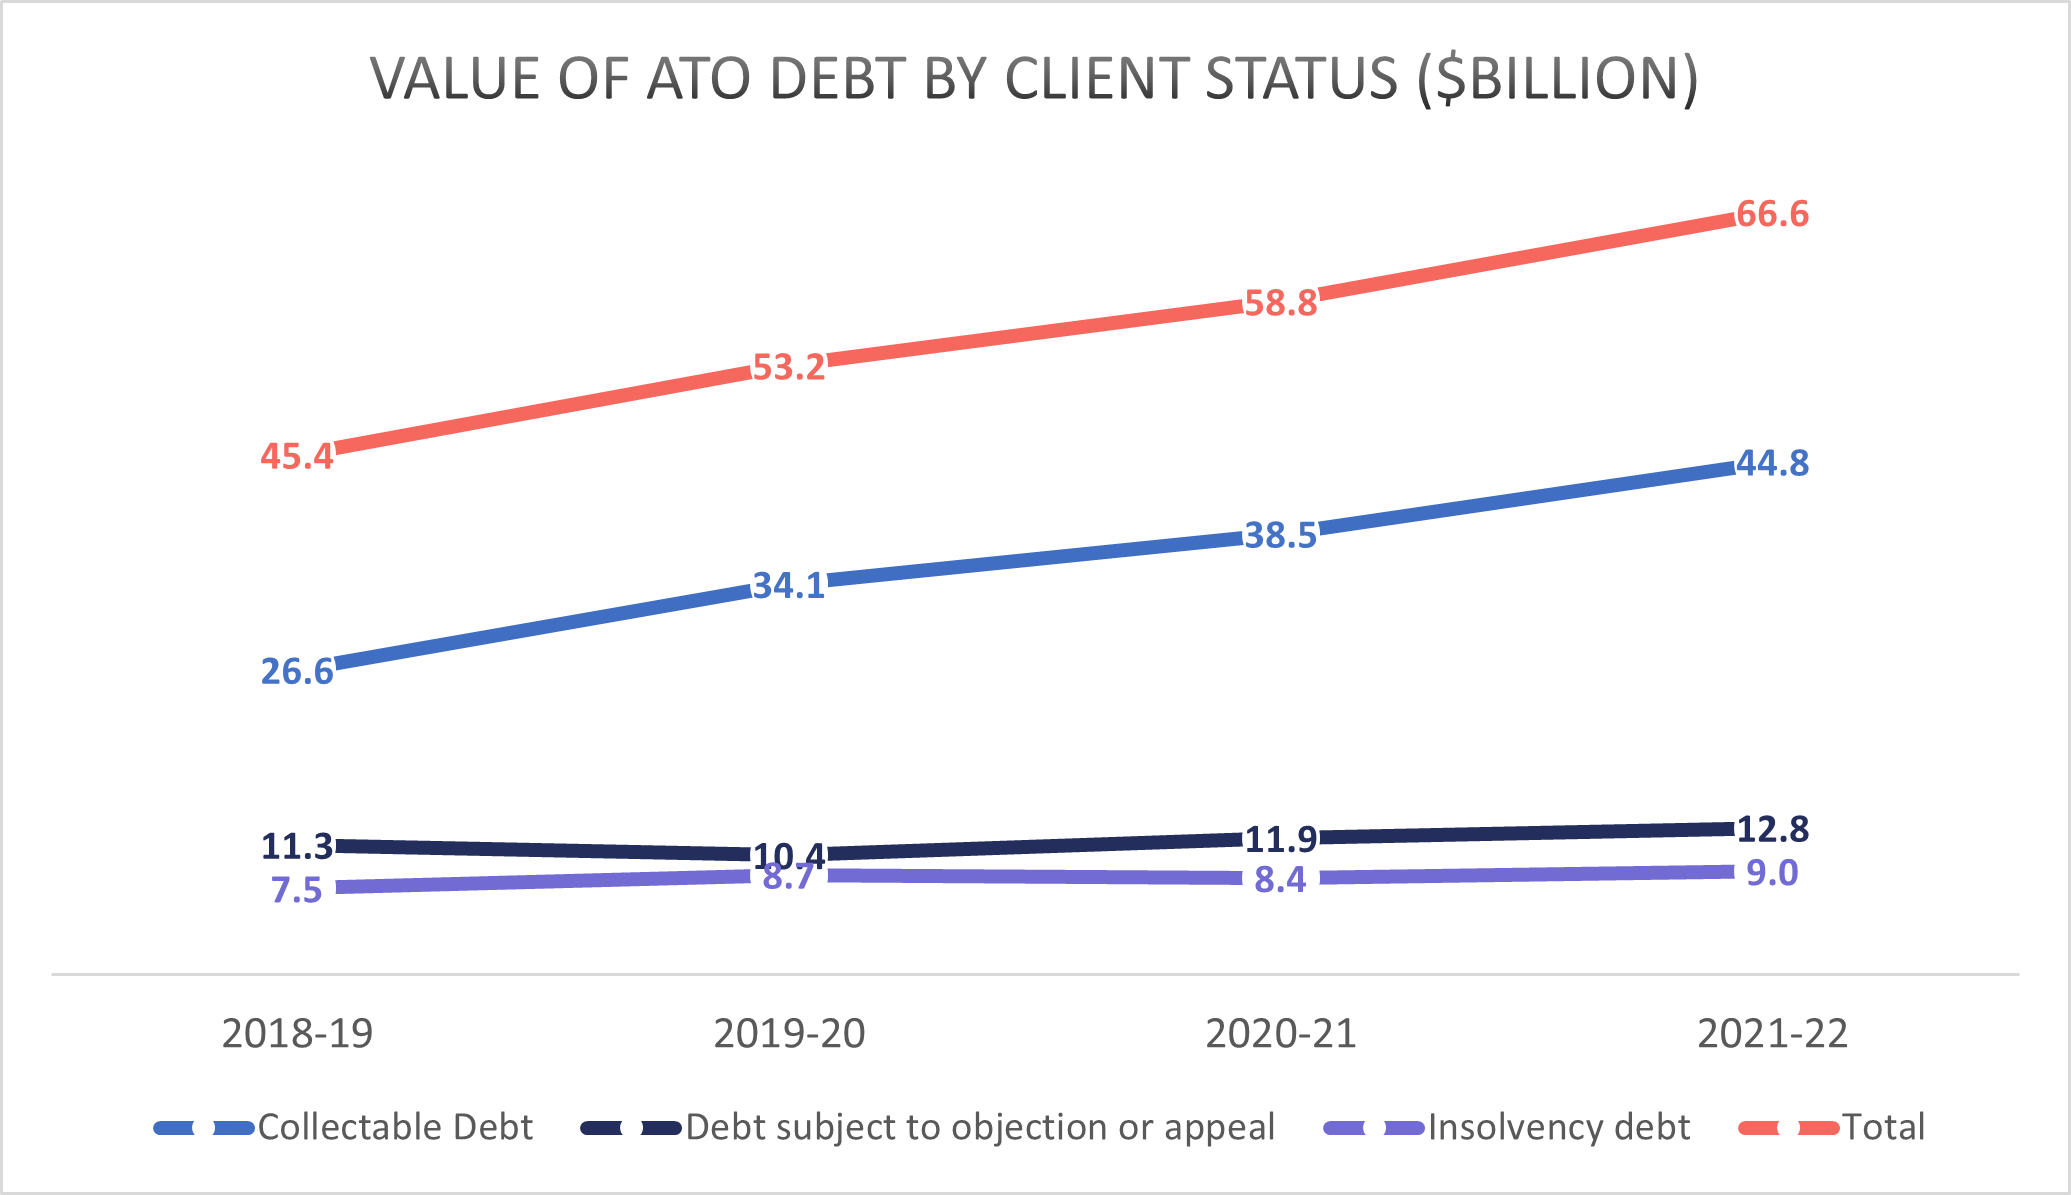 Value of ATO debt by client status